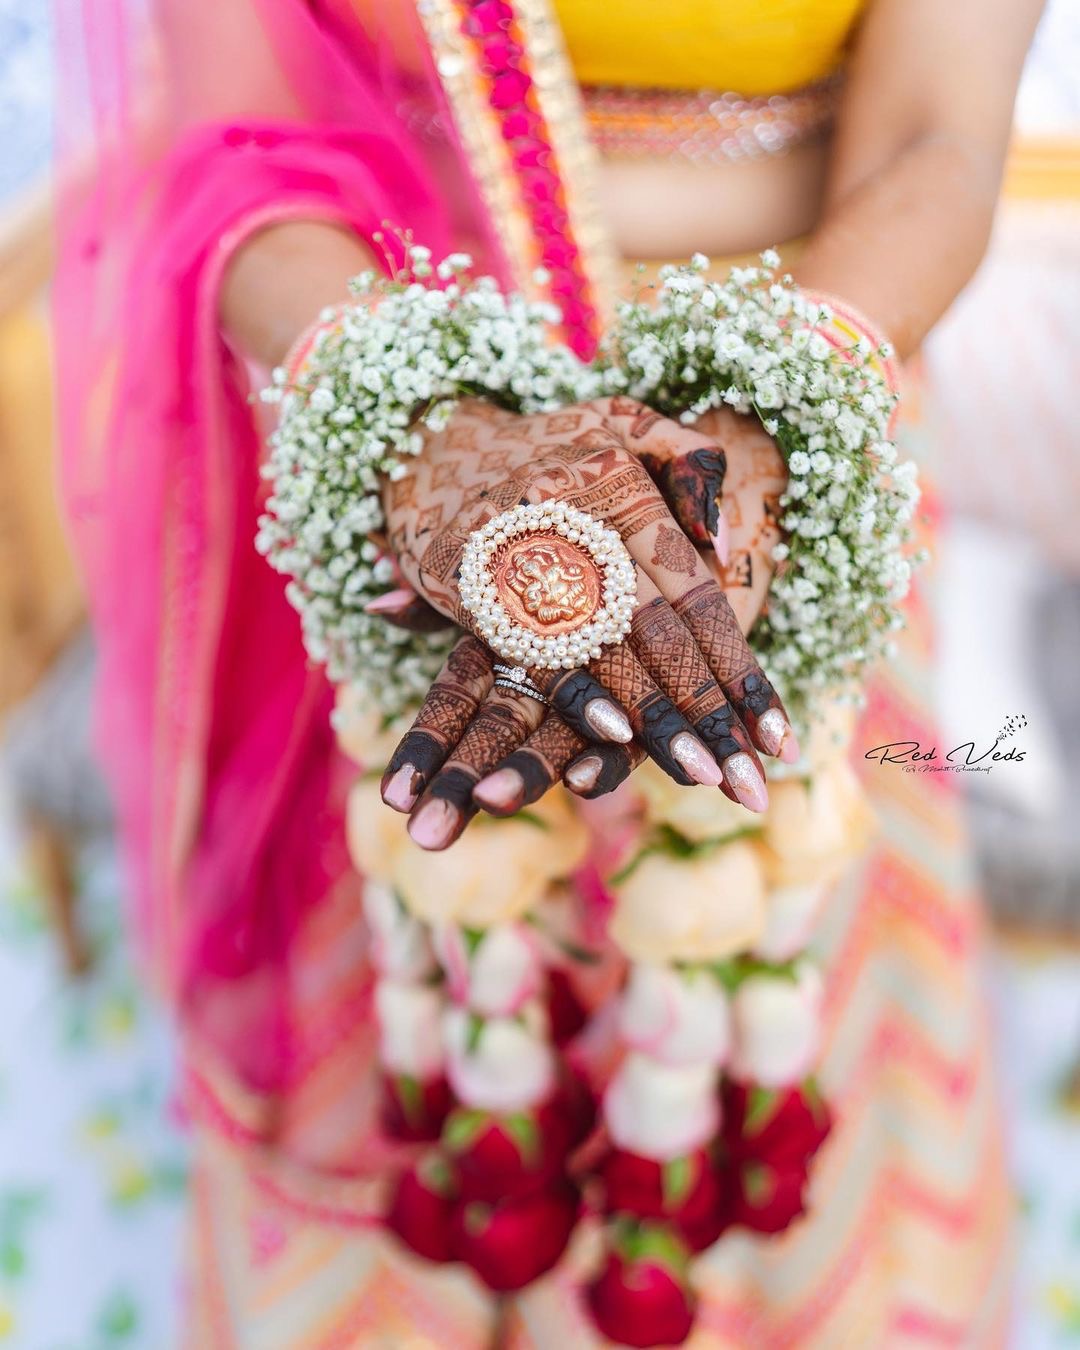 Trending #MehendiPoses Every Bride-To-Be Should Bookmark! | Indian bride  photography poses, Indian wedding photography poses, Indian wedding poses